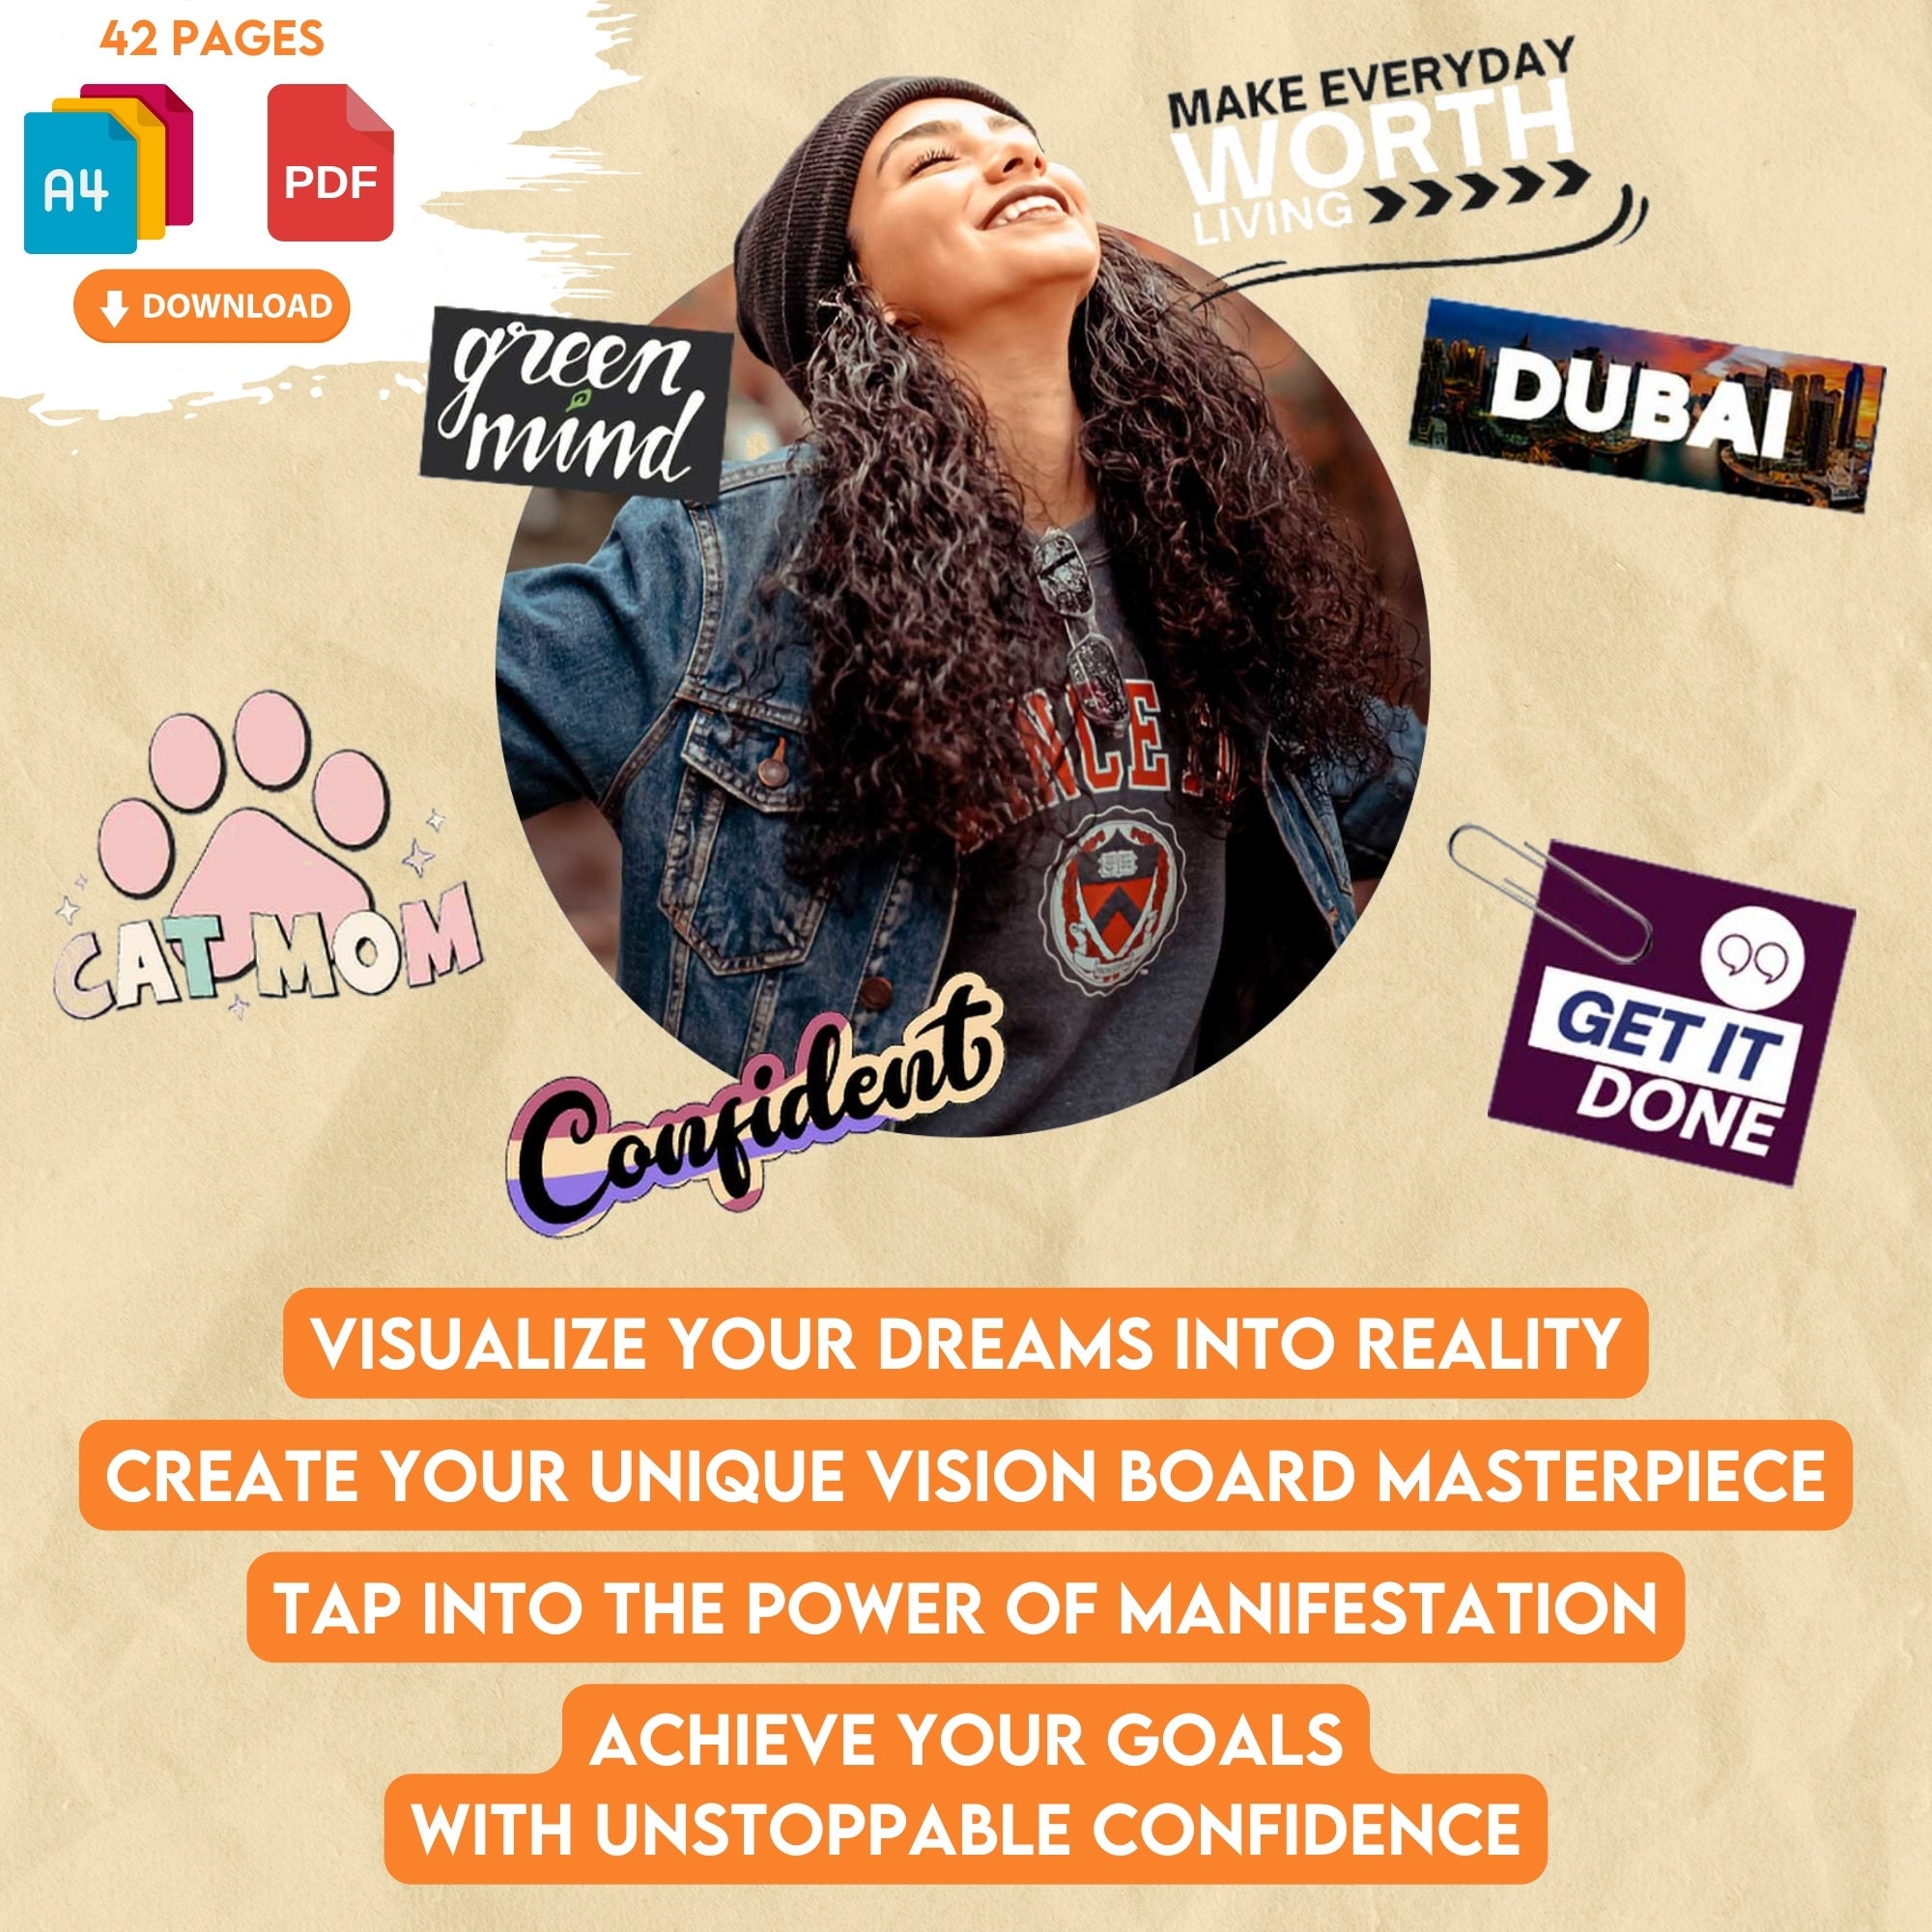 2024 Vision Board Printables 500 Images, Words, Affirmation Cards & More  for Women and Men dream Board Kit A4 PDF Instant Download 